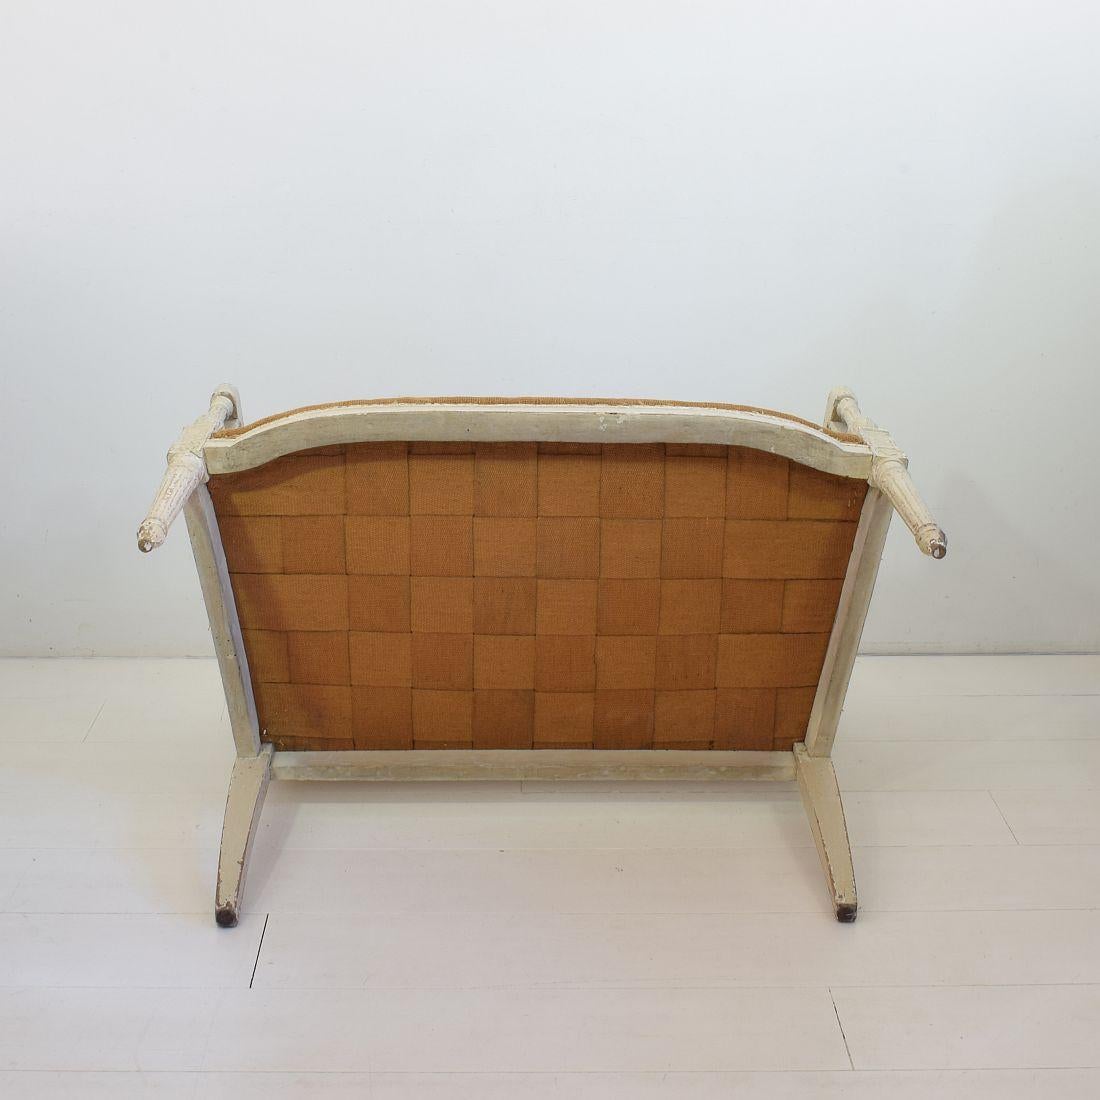 Late 18th Century French Directoire Canape Settee Marquis 2